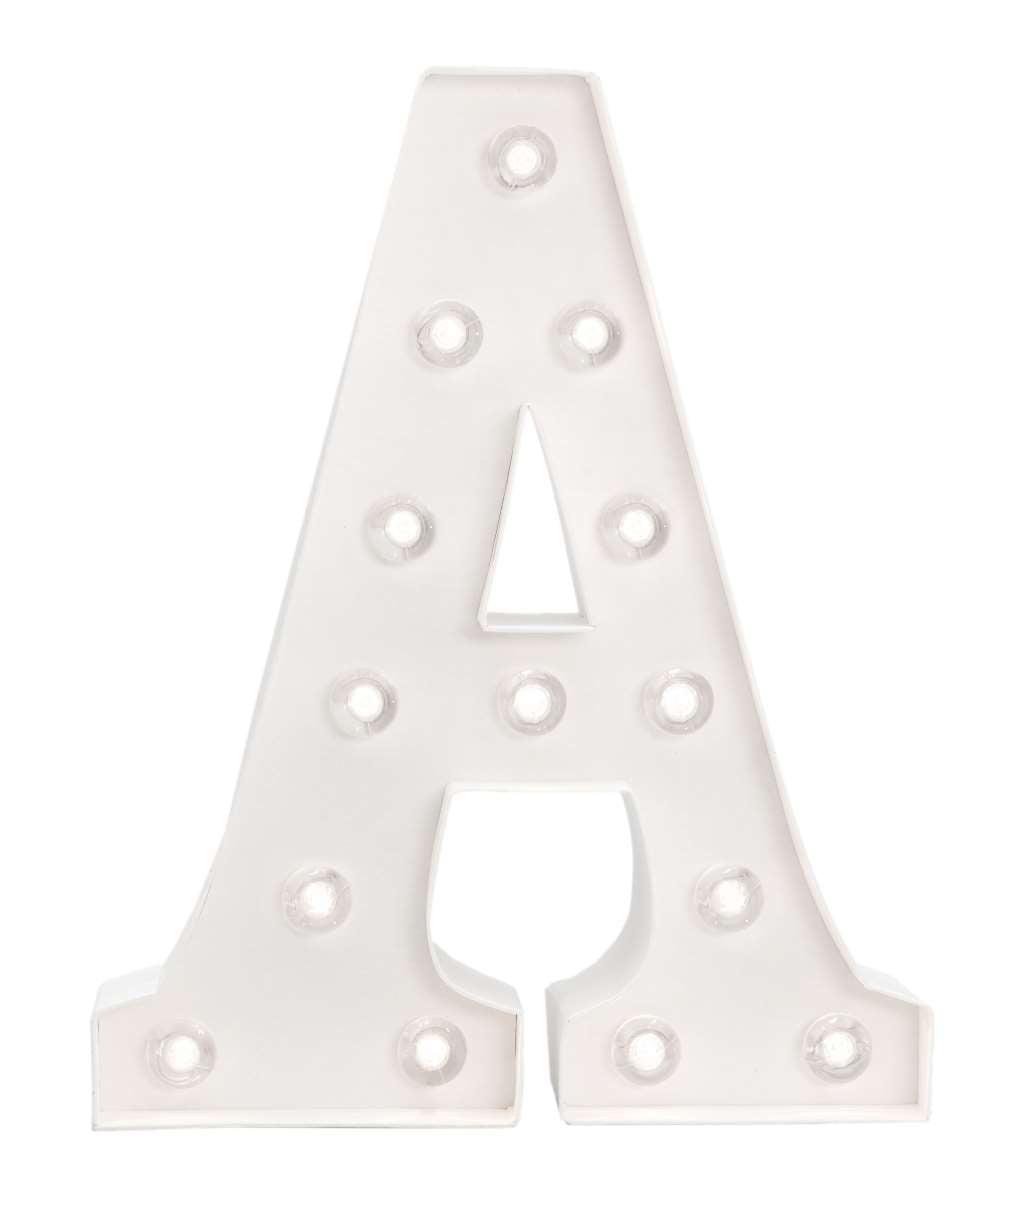 O American Crafts Heidi Swapp Marquee Light Up LED Letter Kit